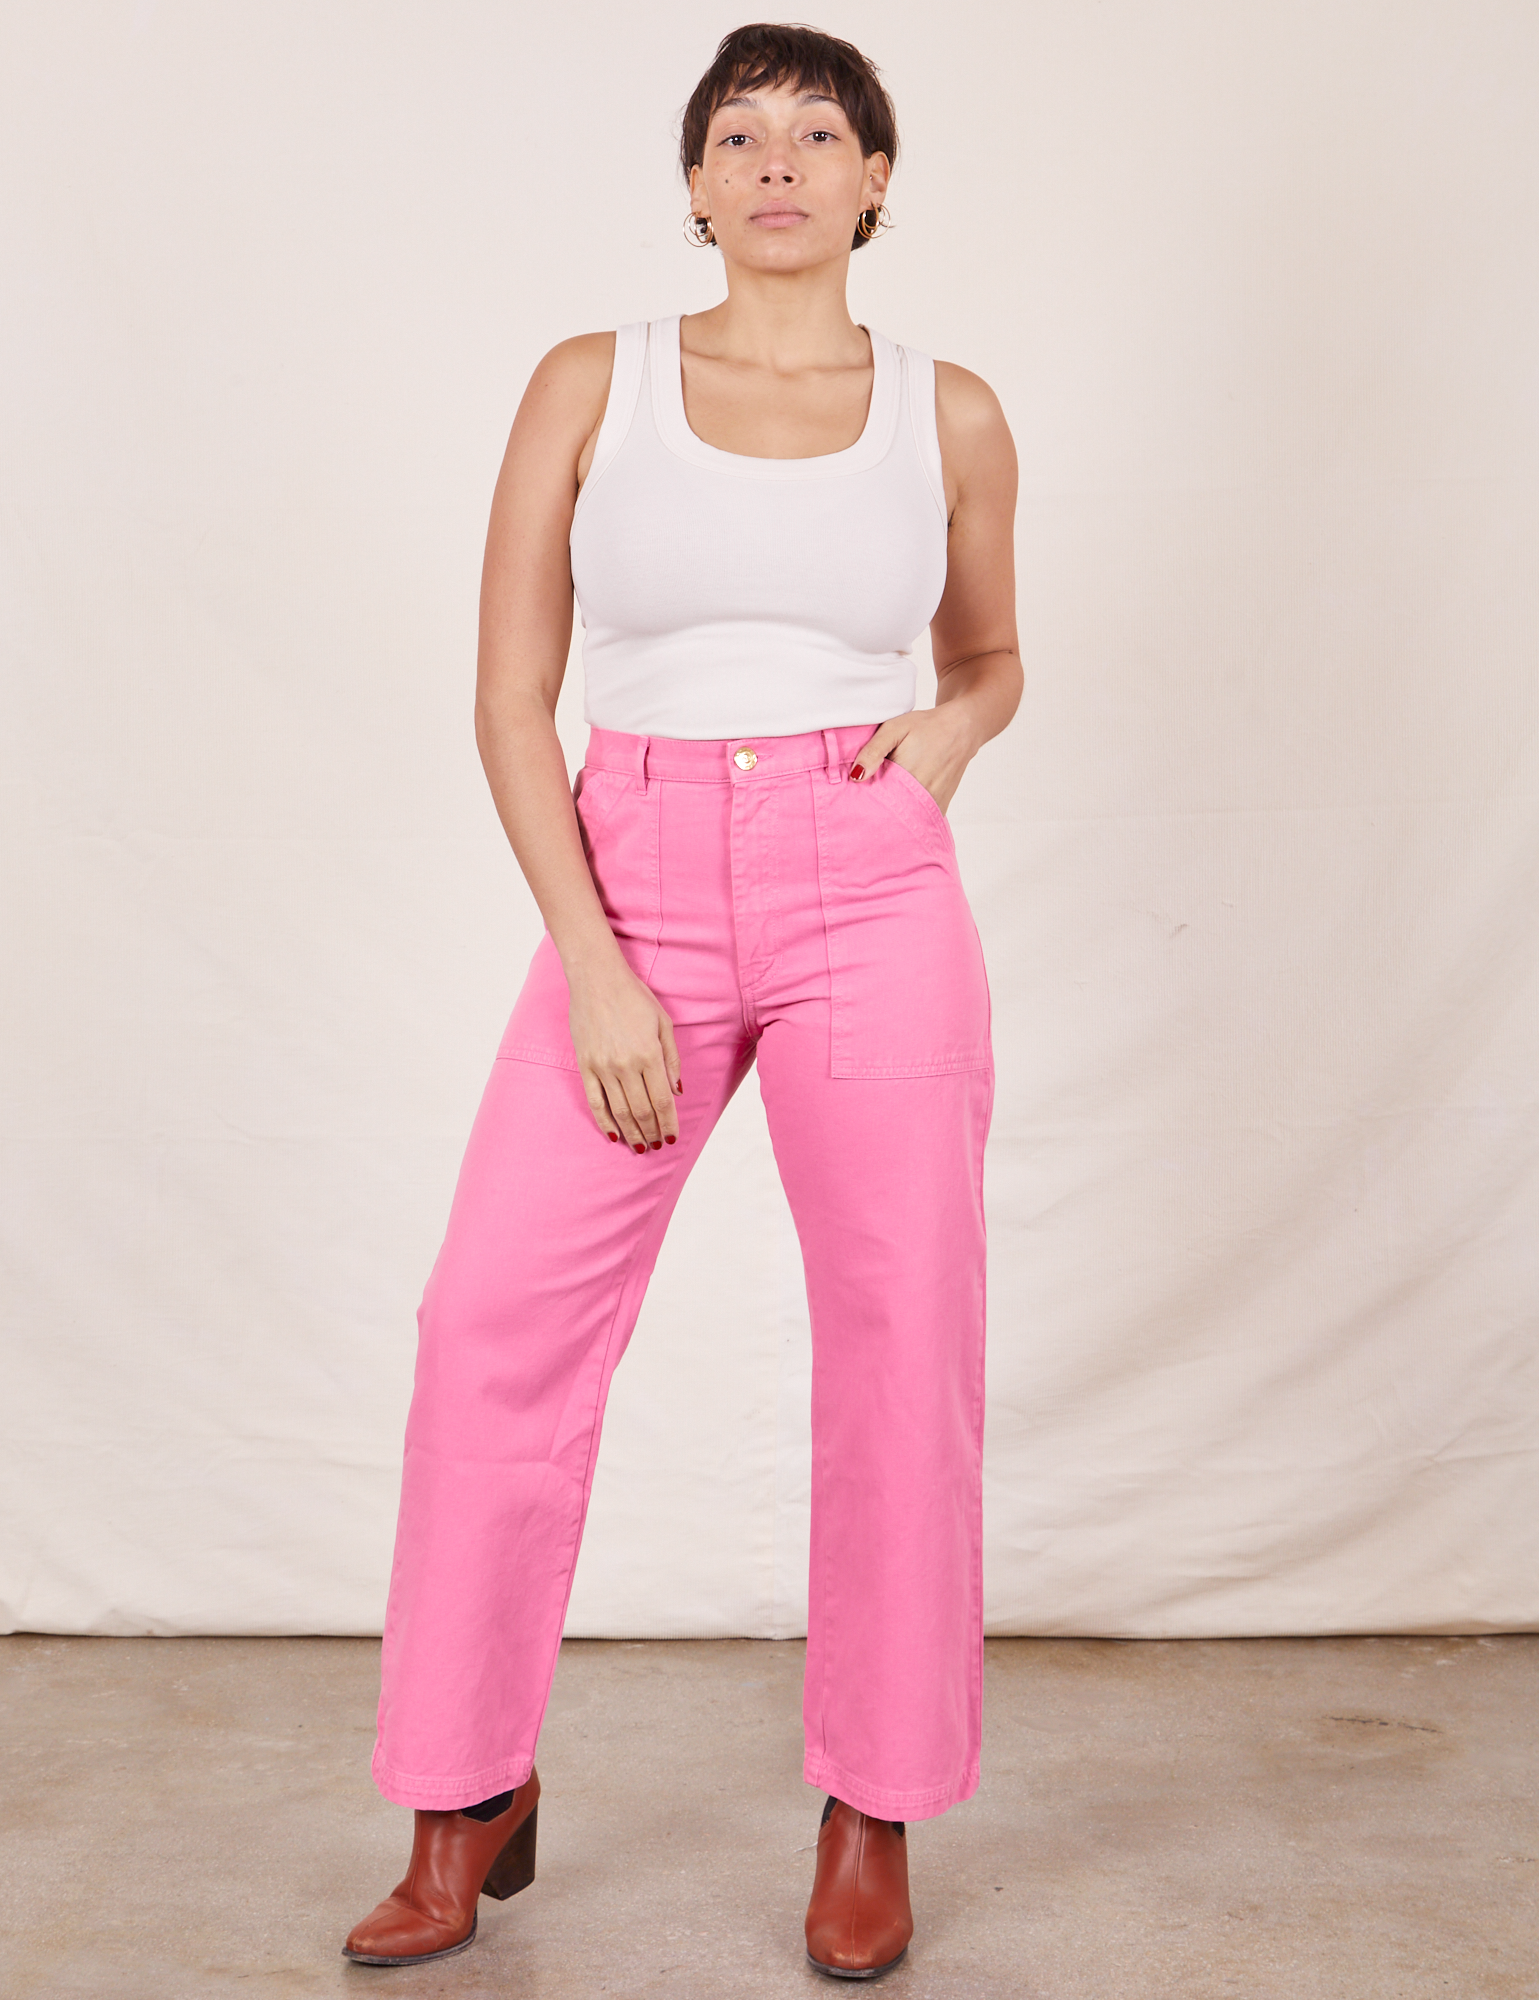 Tiara is 5'4" and wearing size S Work Pants in Bubblegum Pink paired with Tank Top in vintage tee off-white